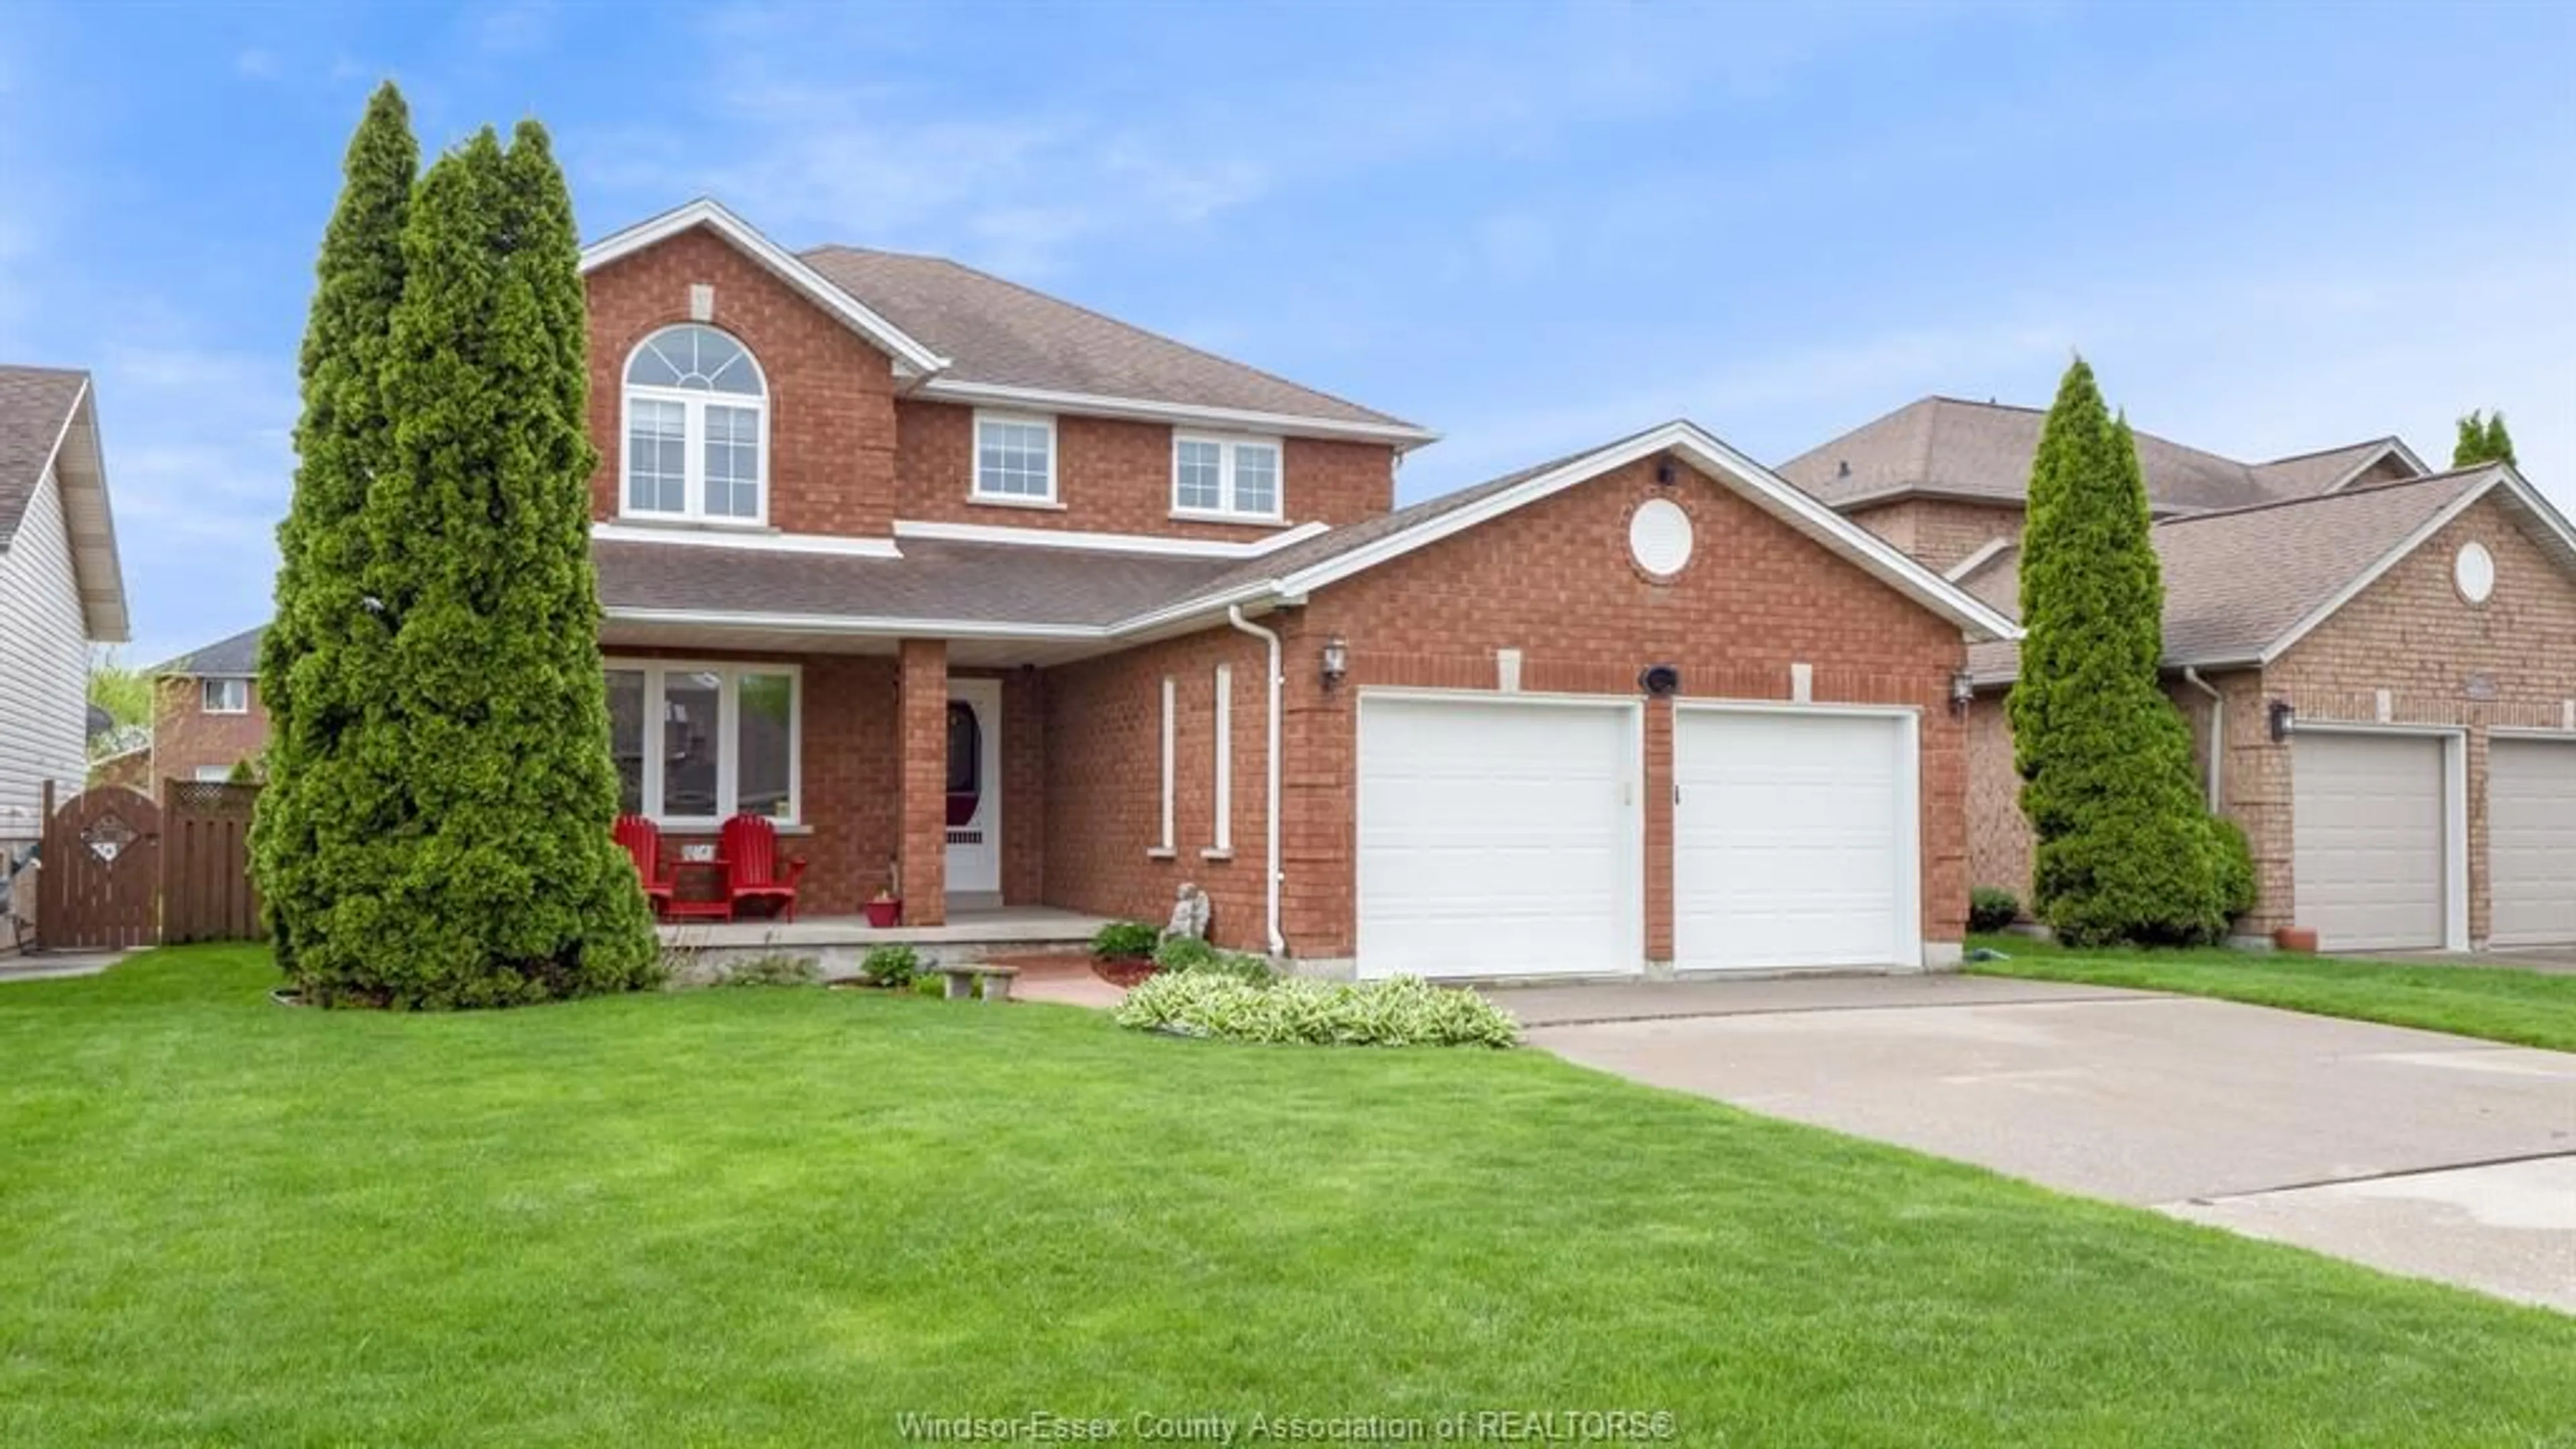 Home with brick exterior material for 12713 NORTHFIELD Way, Tecumseh Ontario N8N 4W8